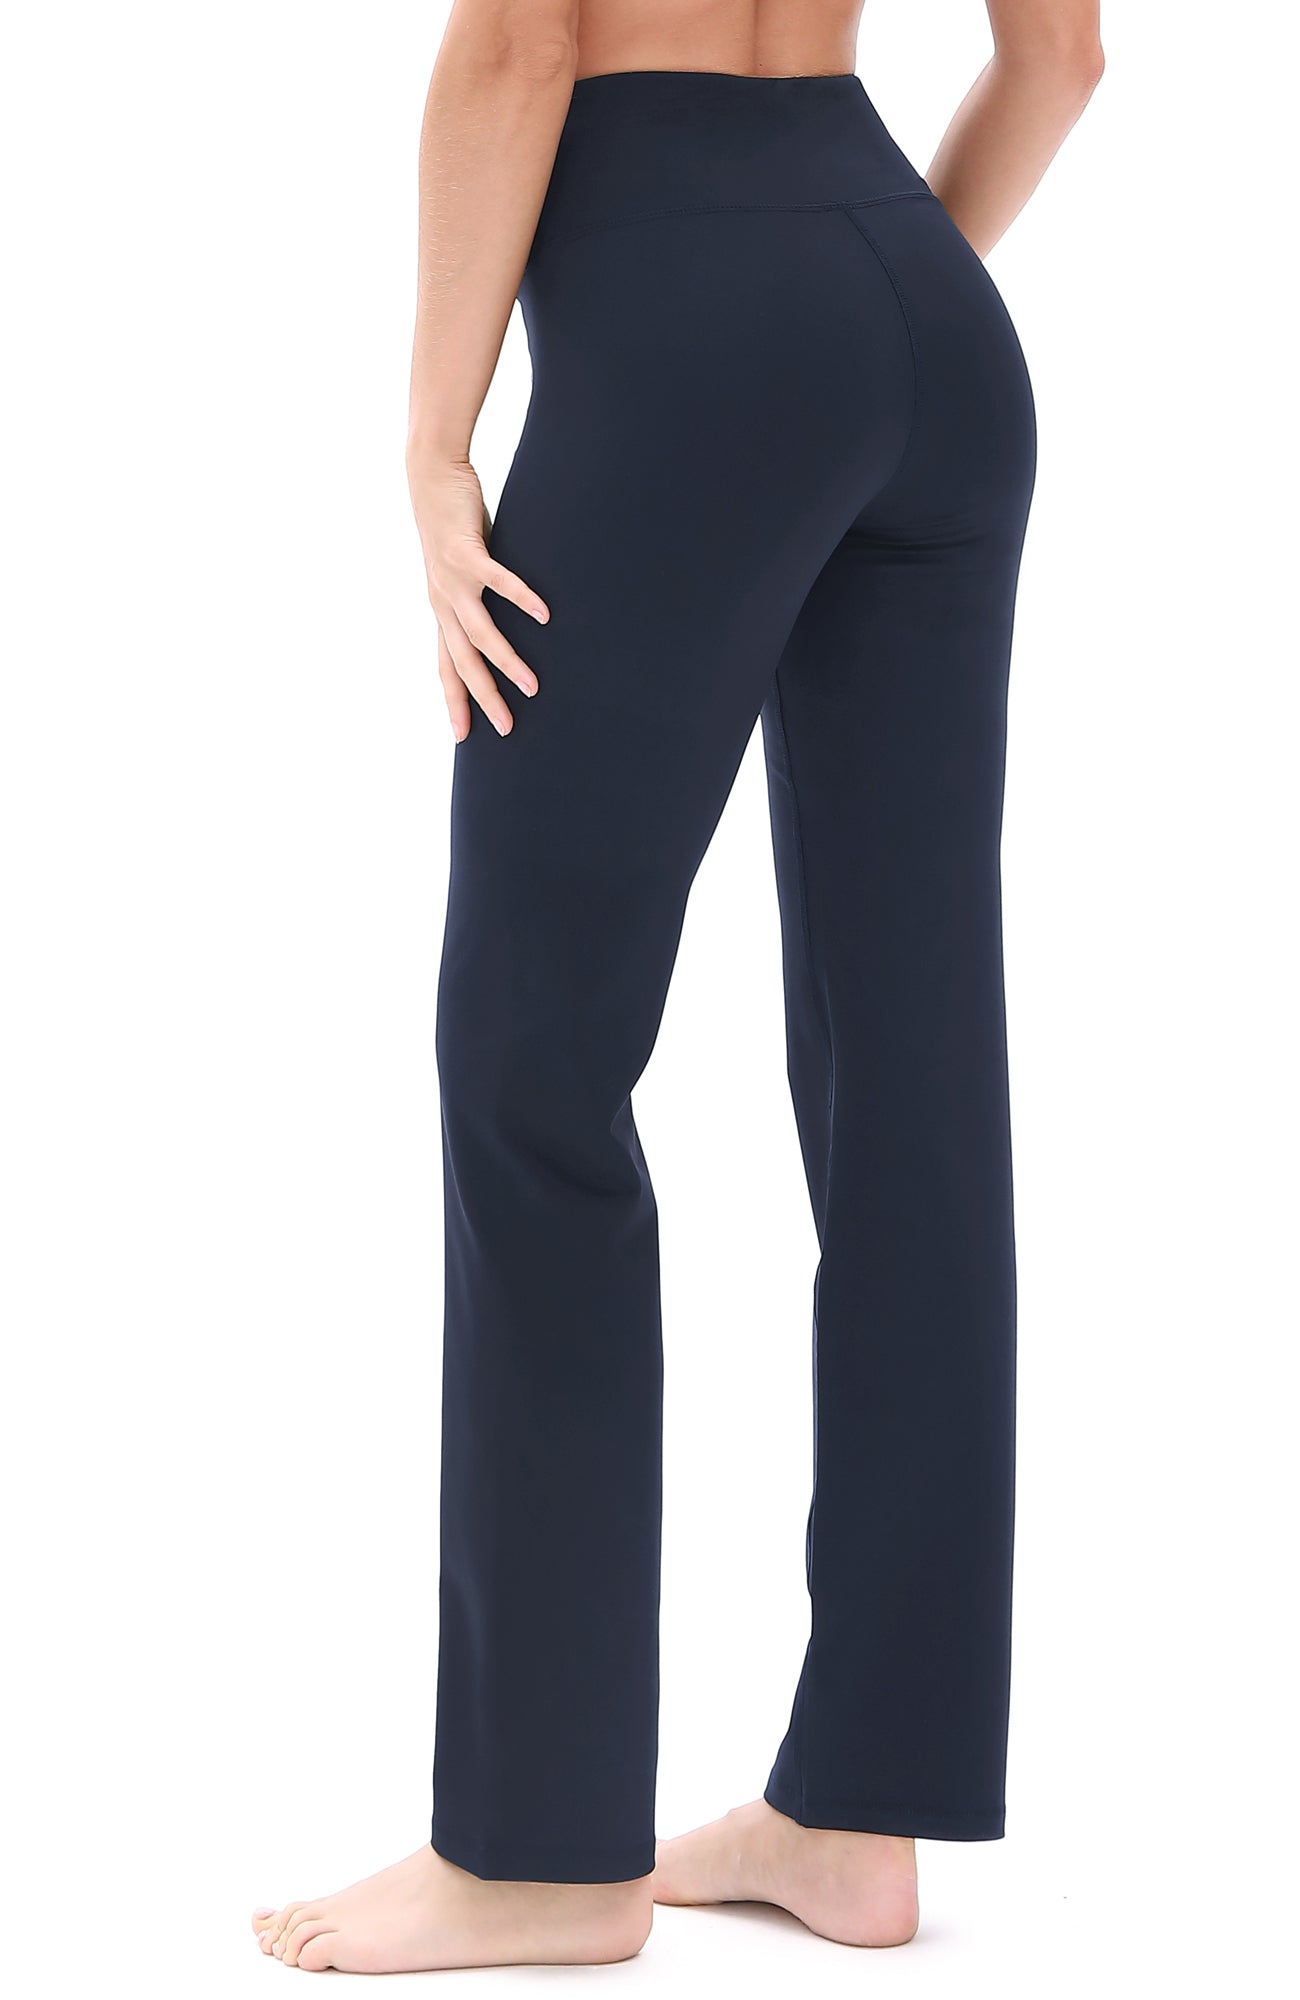 LIVI Yoga Pant with Smoothing Control Tech | LaneBryant